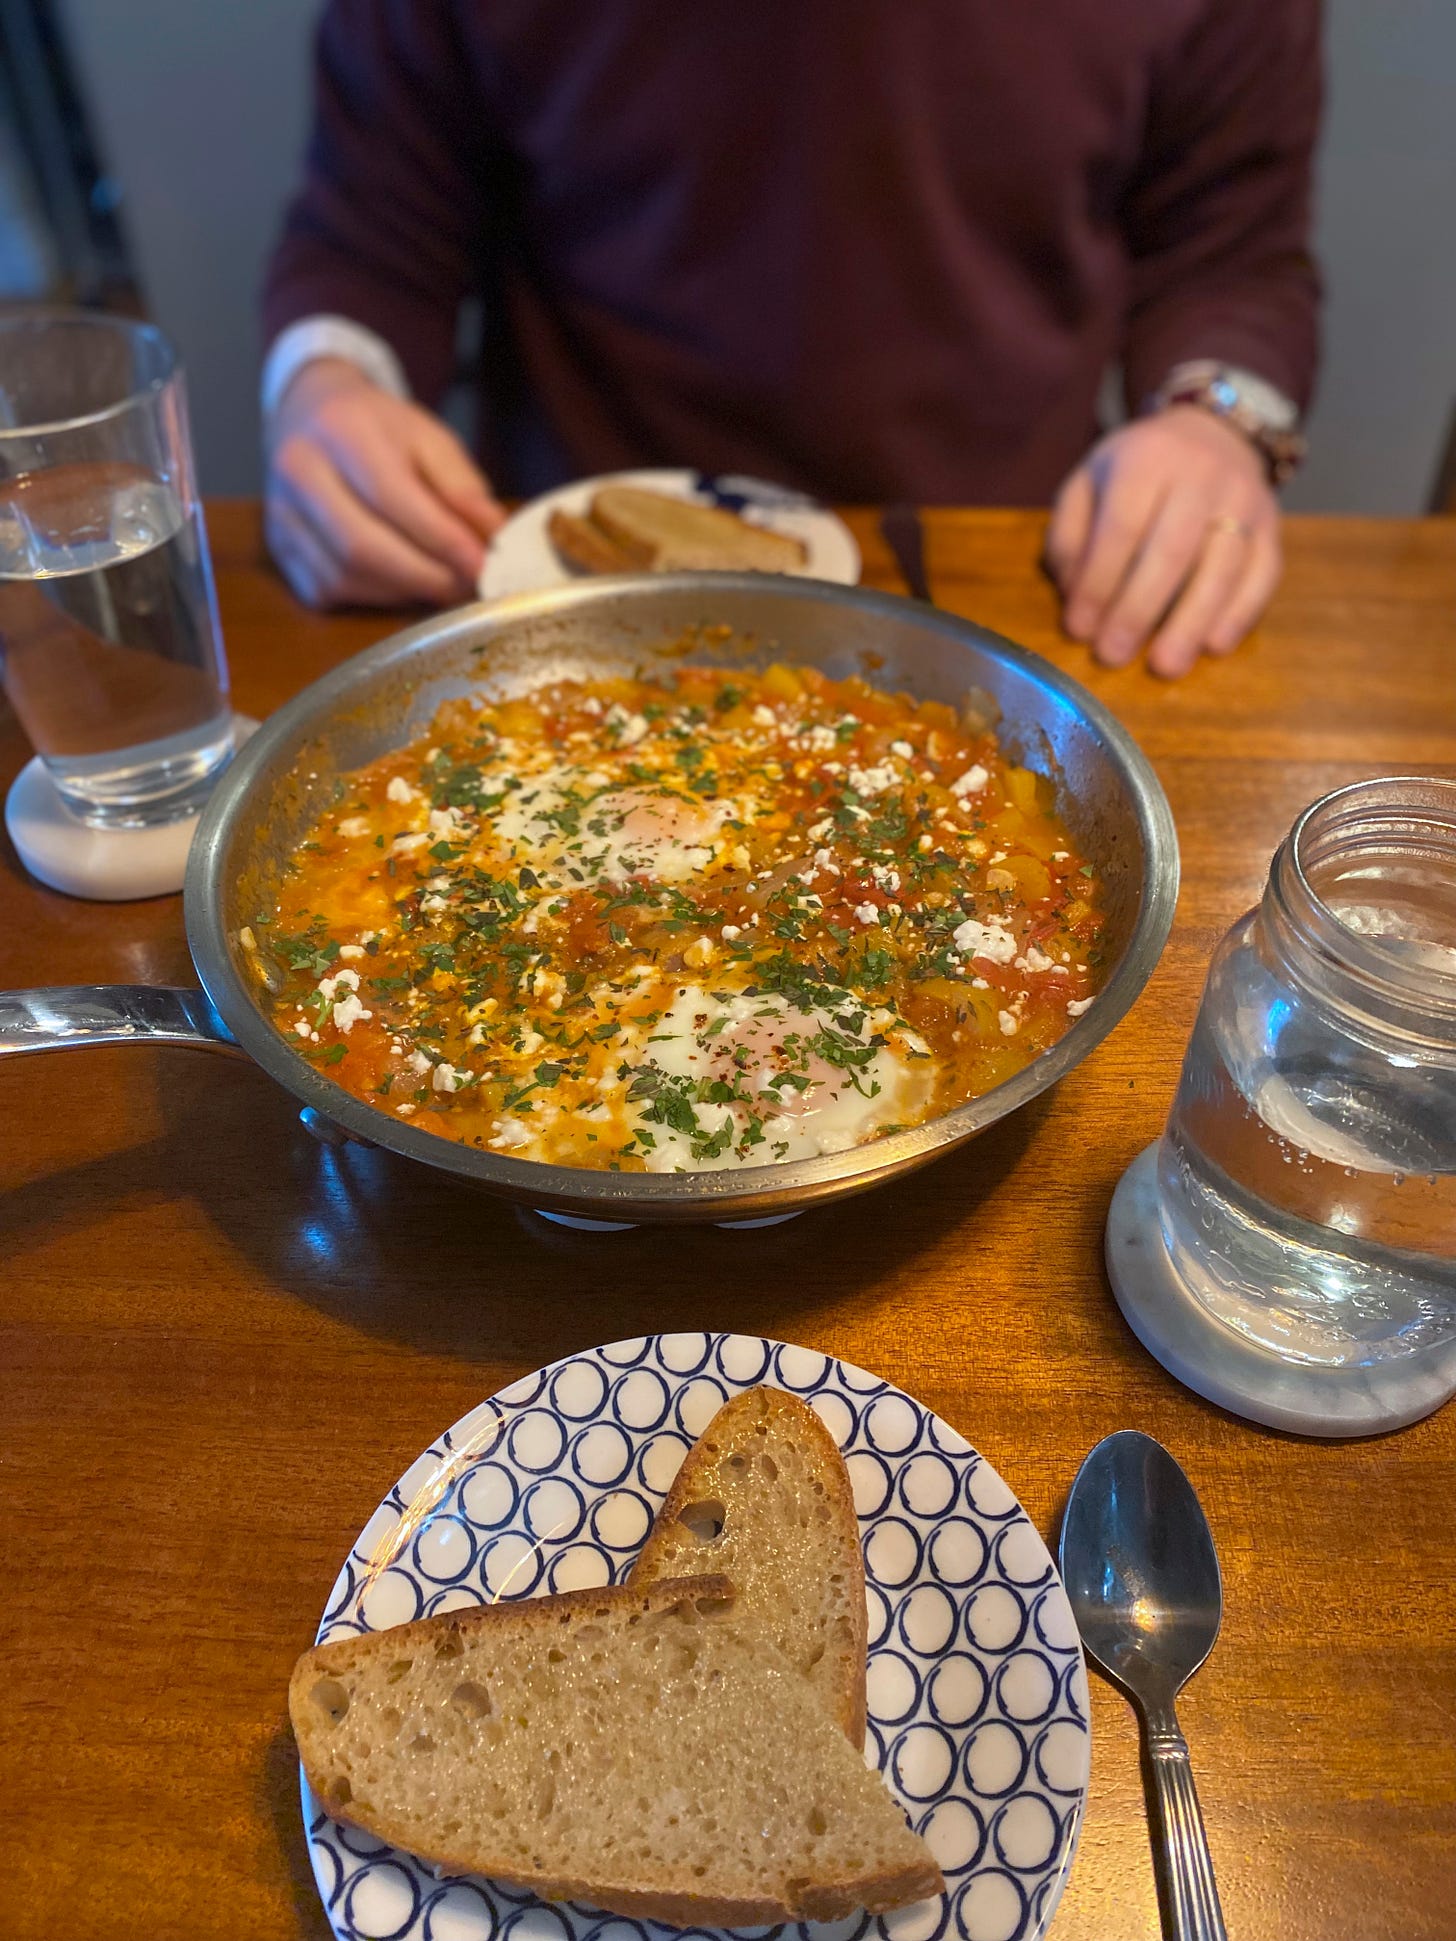 A steel pan of shakshuka, a yellowish-orange colour with splashes of red throughout. Two eggs are poached in the mixture, and the top is sprinkled with feta and a mix of herbs. On opposite sides of the pan are side plates with slices of bread. Jeff sits in front of the plate in the background, his hands resting on the table.